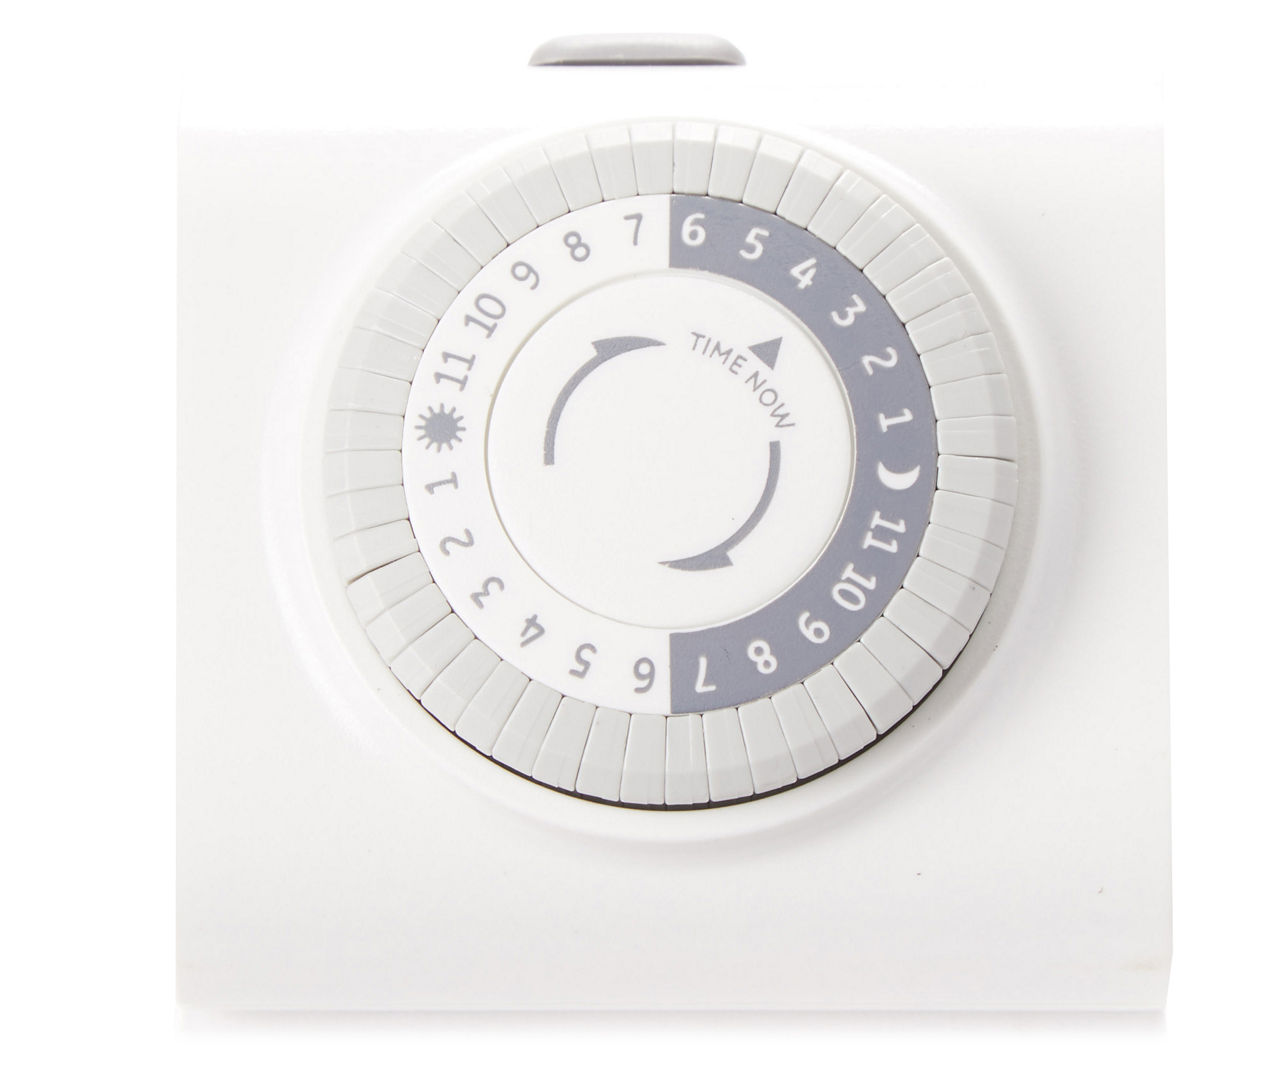 UltraPro 24-Hour Mechanical In-Wall Timer, White